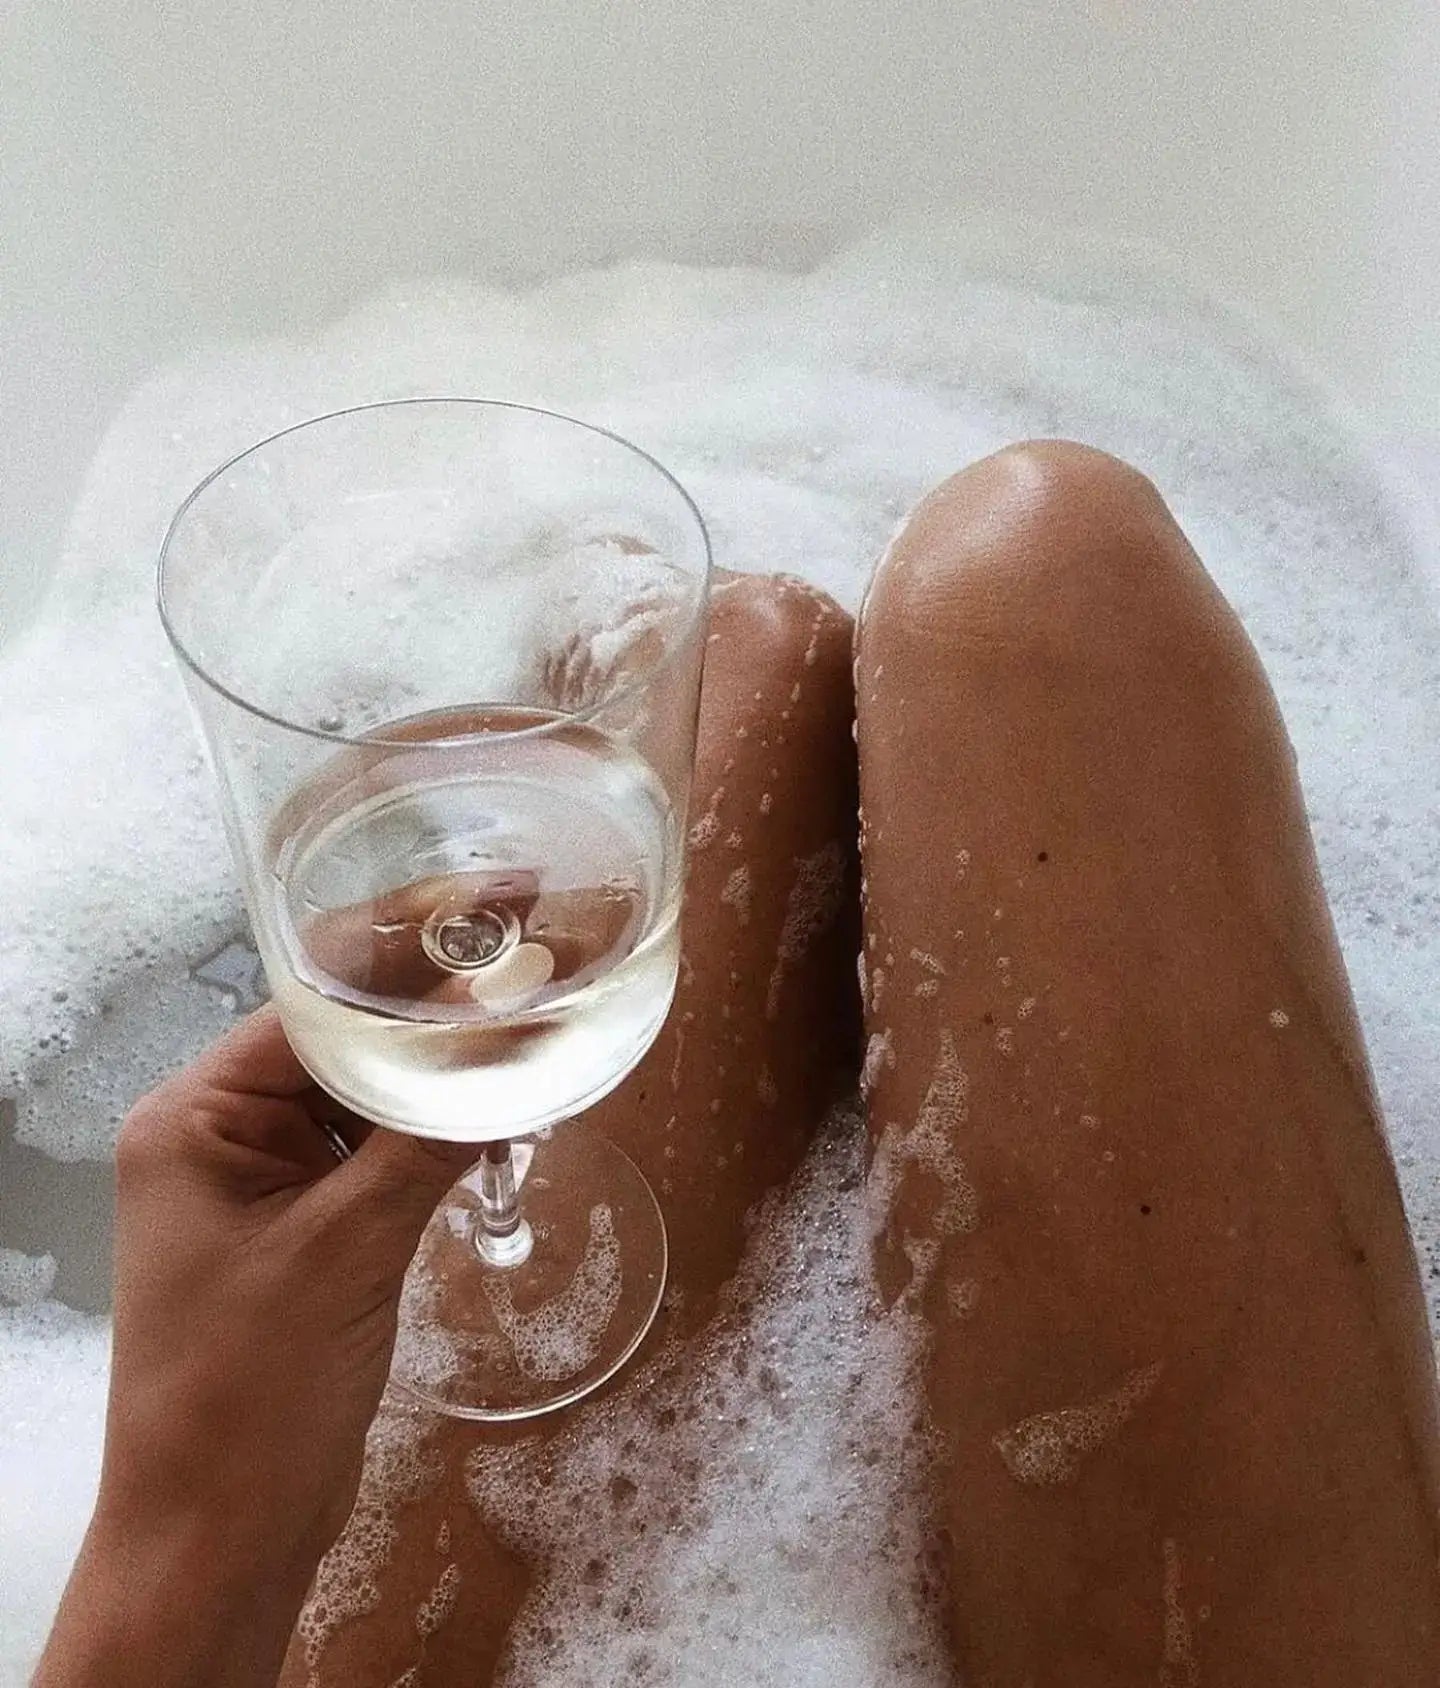 Tanned Girl in Bathtub holding wine